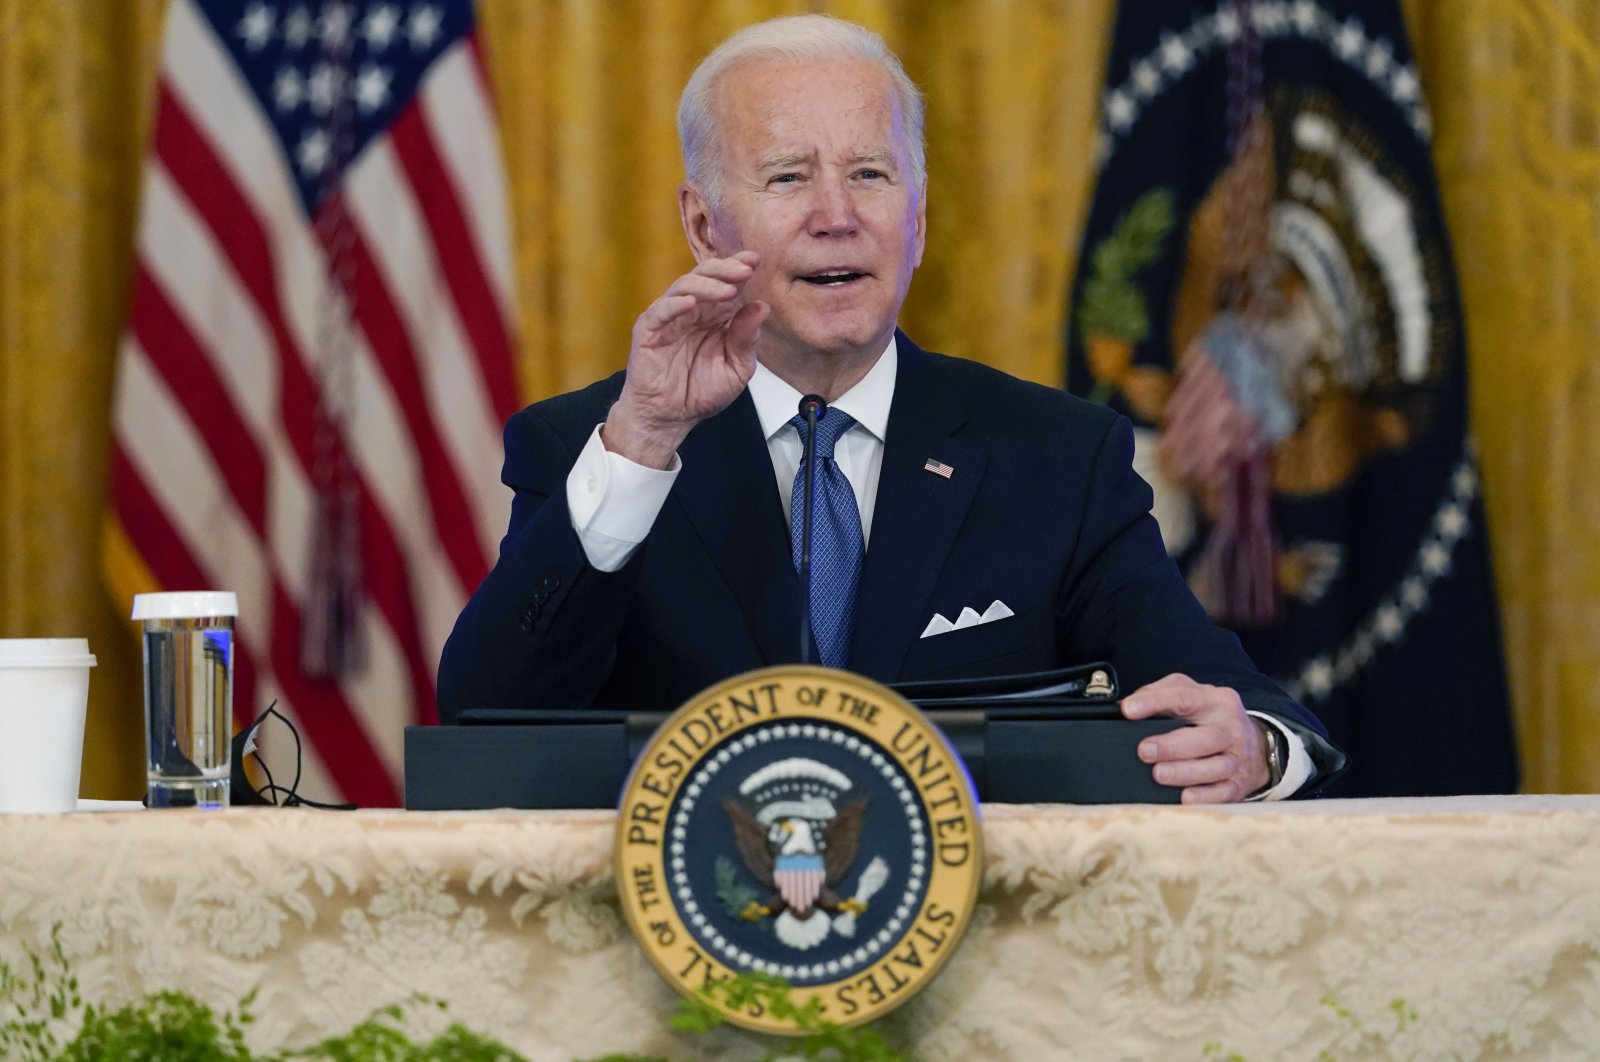 President Joe Biden speaks during a meeting on efforts to lower prices for working families, in the East Room of the White House in Washington, U.S., Jan. 24, 2022. (AP Photo)